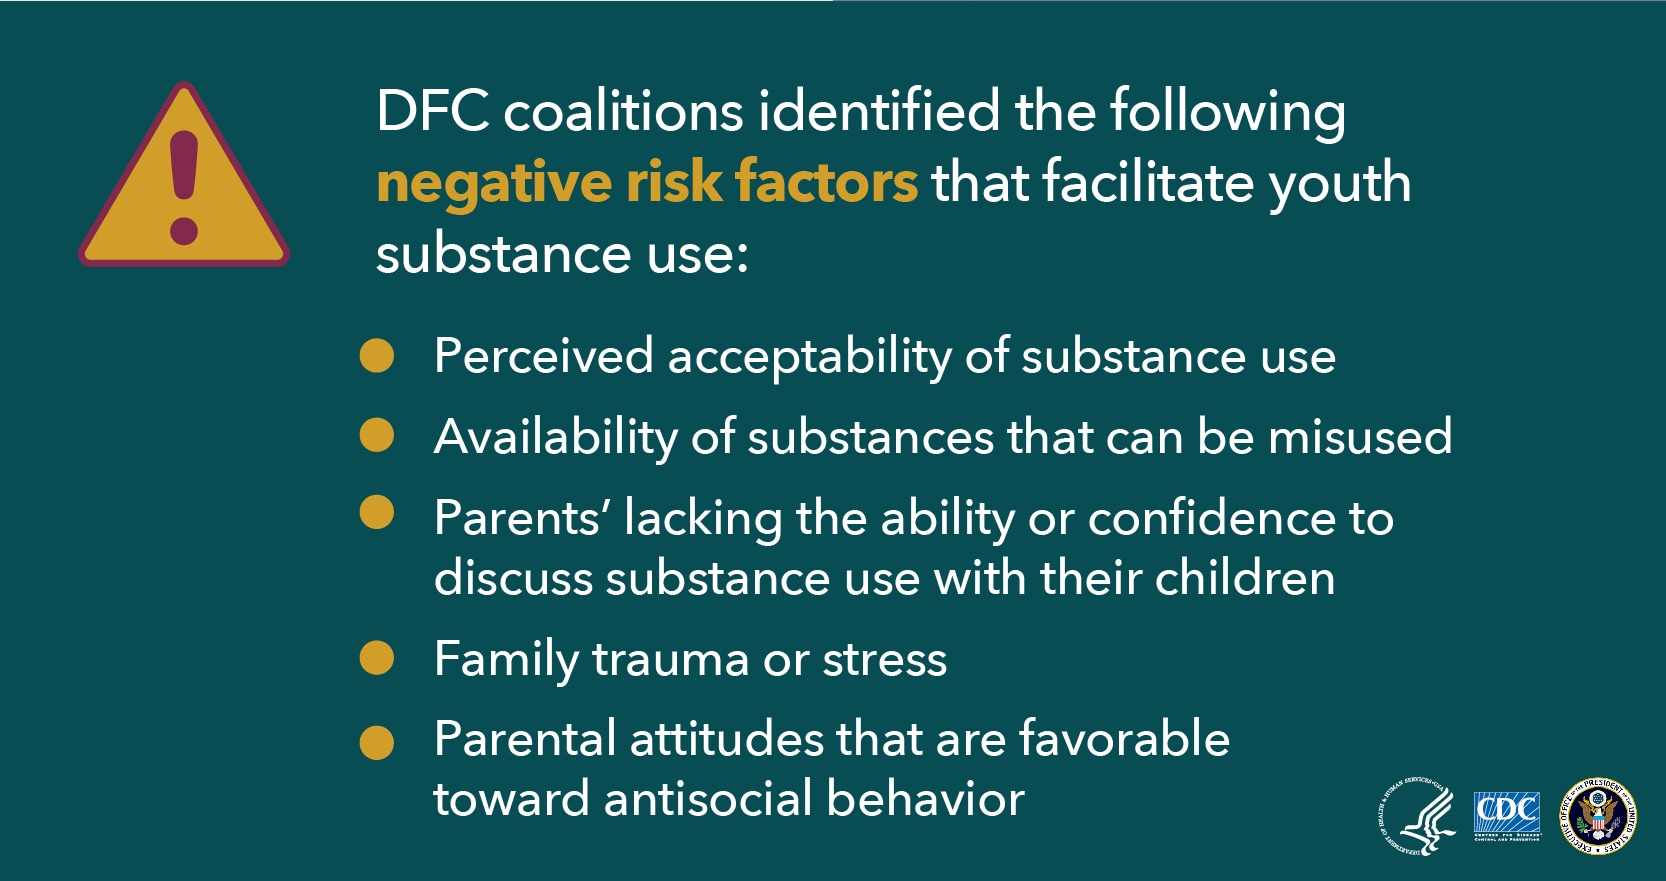 DFC coalitions identified the following negative risk factors that facilitate youth substance use: Perceived acceptability of substance use, Availability of substances that can be misused, Parents’ lacking the ability or confidence to discuss substance use with their children, Family trauma or stress, Parental attitudes that are favorable toward antisocial behavior.